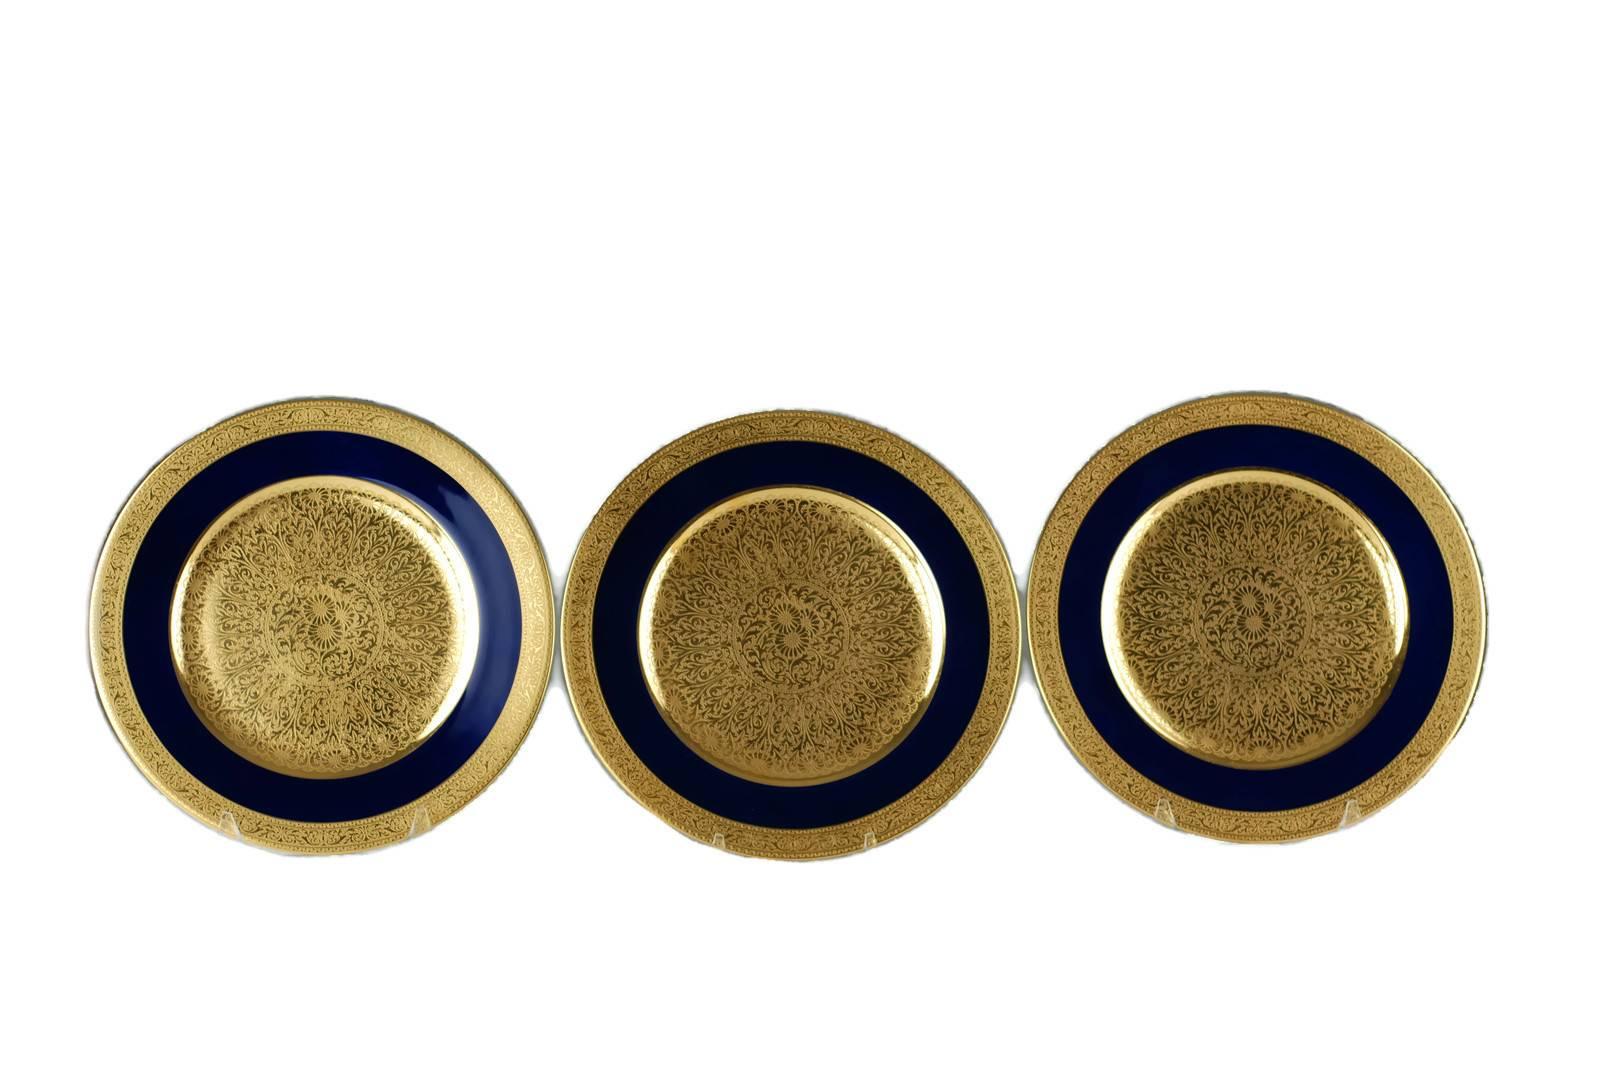 Set of 12 Lenox Cobalt and Gilt Encrusted Porcelain Cabinet Service Plates In Good Condition For Sale In Cincinnati, OH